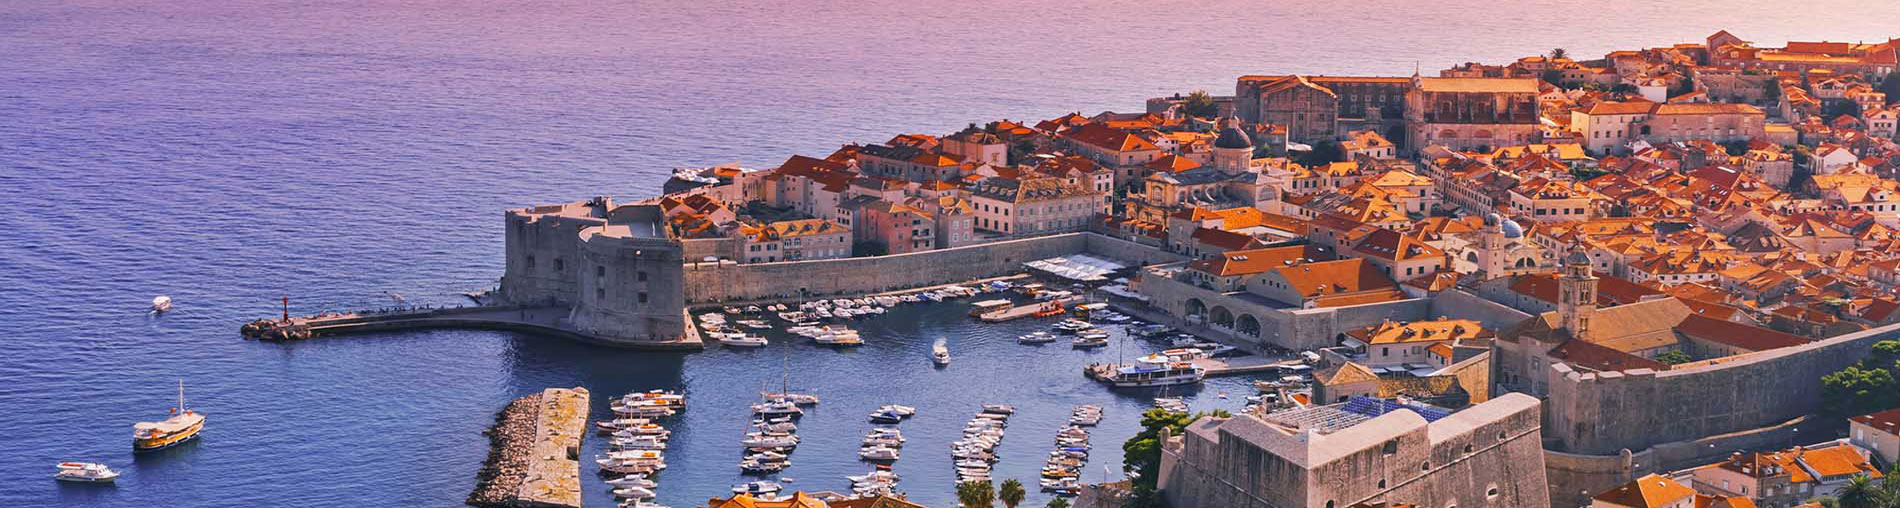 Croatia Tour Package From India